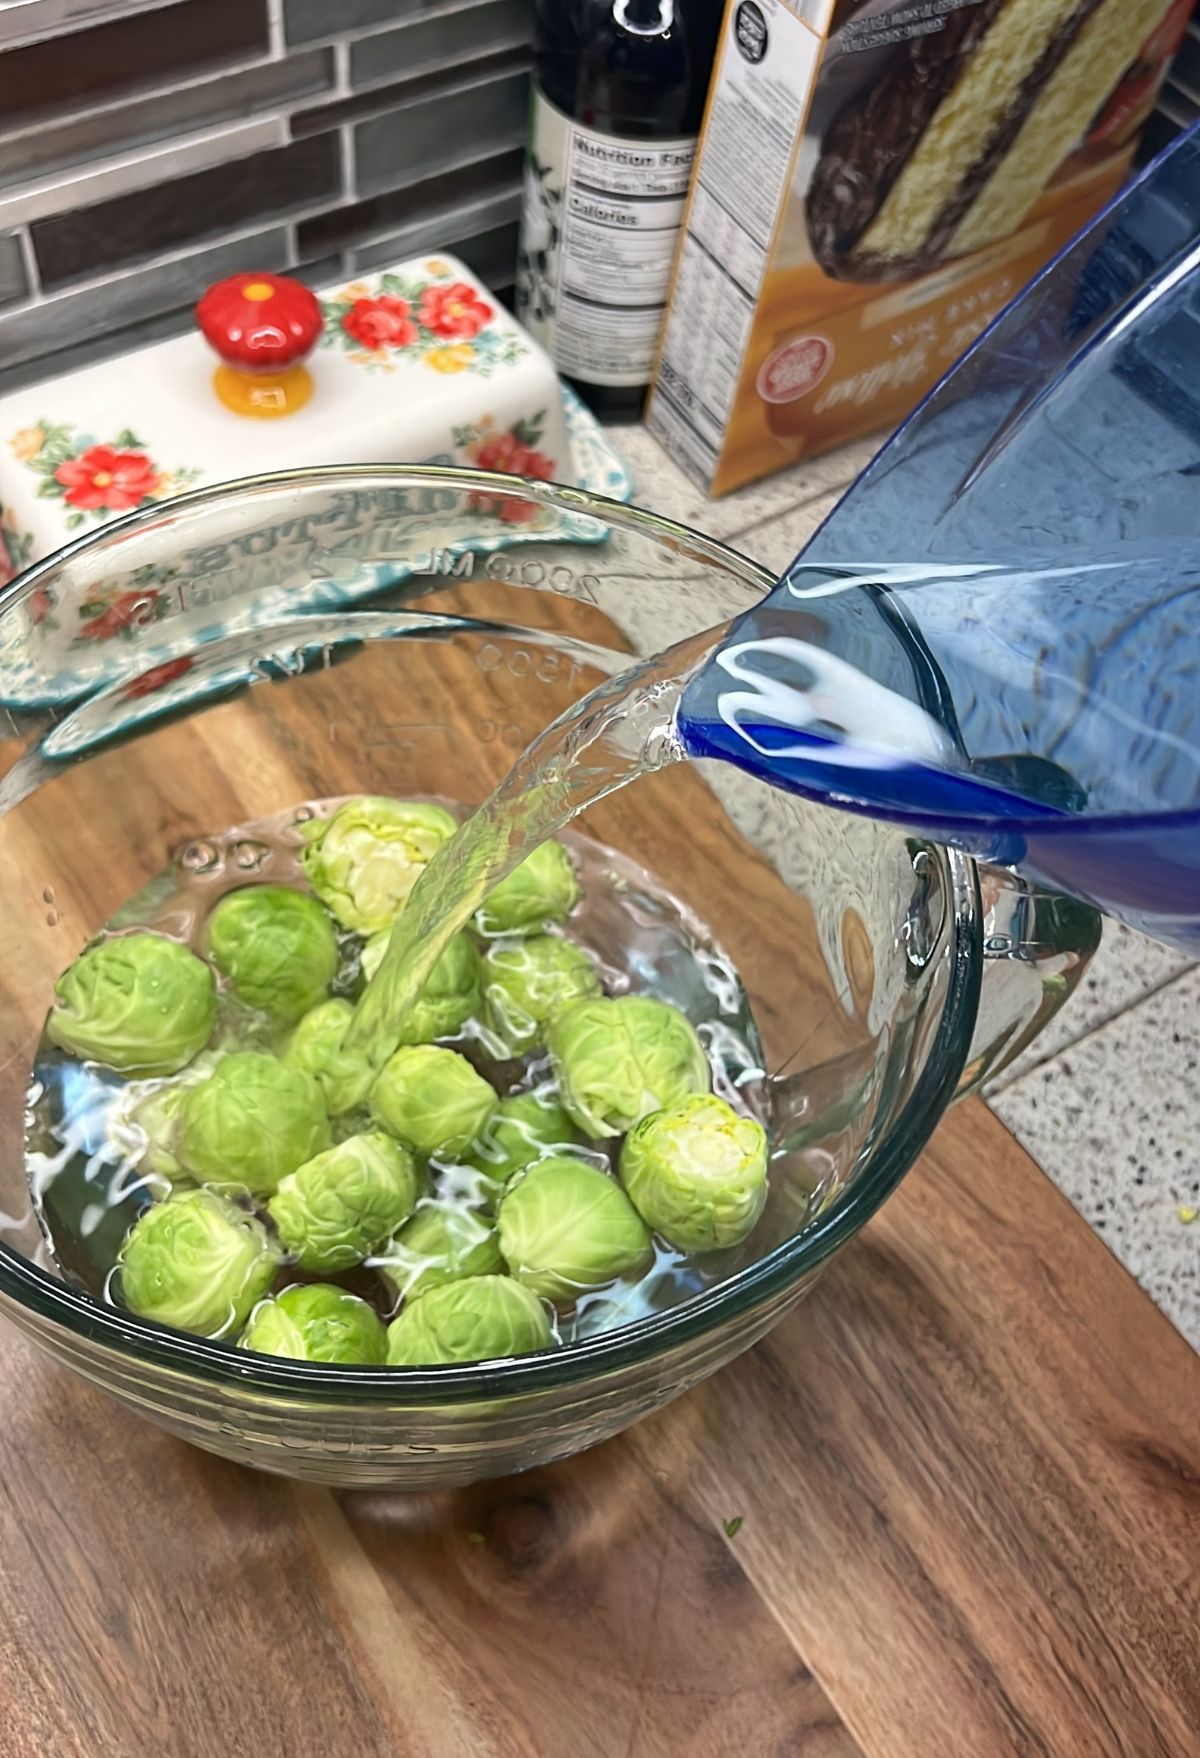 Water being poured into a bowl of brussels sprouts.